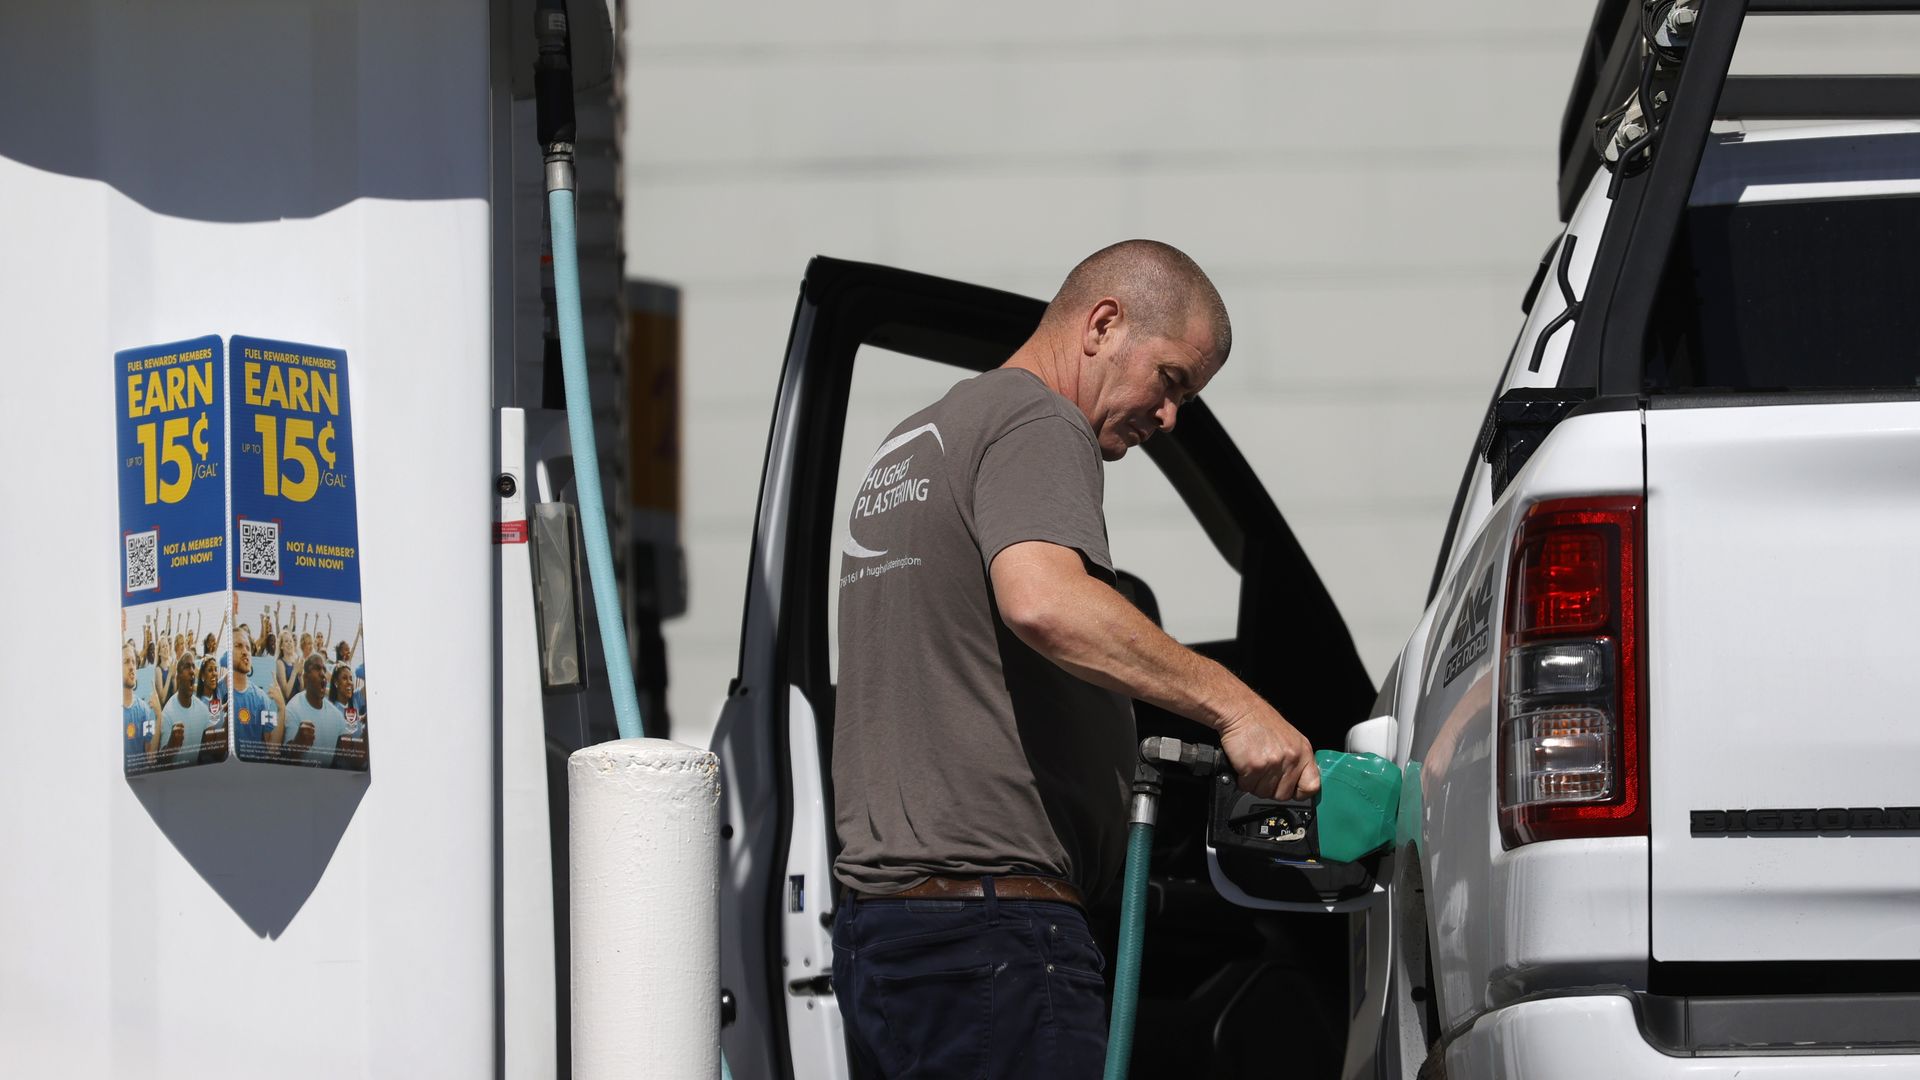 A customer pumps gas into his truck at a Shell station on October 12, 2021 in San Francisco, California.